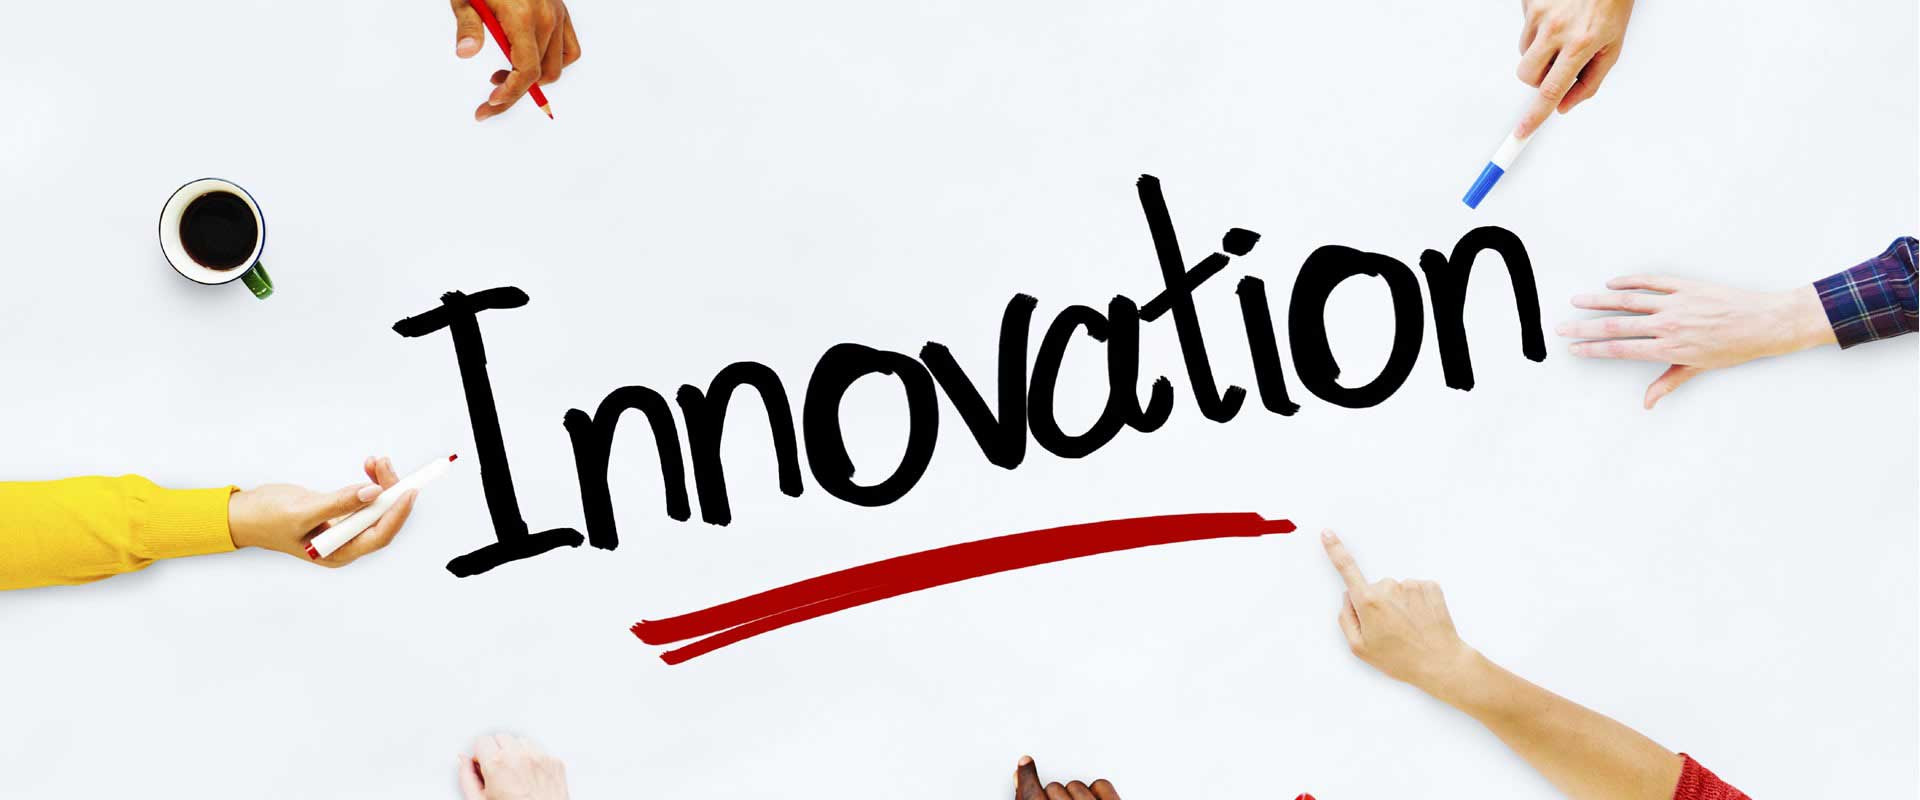 Why we cannot afford to relegate innovation to the backseat